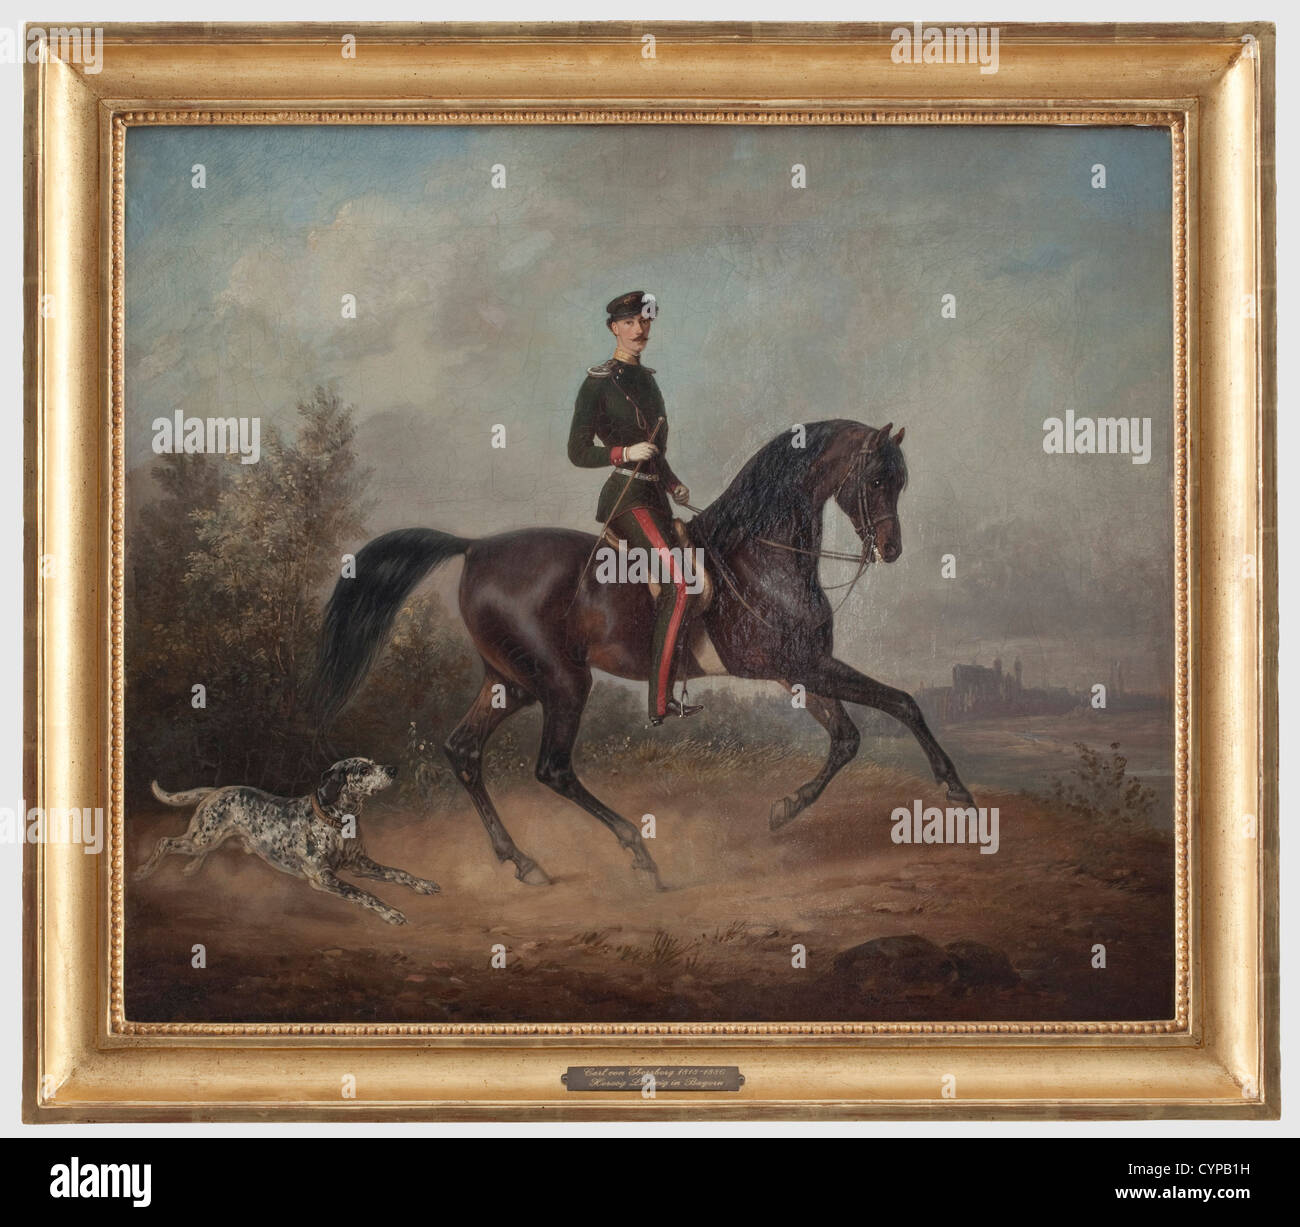 Carl Martin Edler von Ebersberg (1818 - 1880) - an equestrian portrait, of Duke Ludwig in Bavaria (1831 - 1920) as a major, 26 years of age, in the 1st Bavarian Chevaulegers regiment. Oil on canvas, signed and dated on the lower right 'Ebersberg 1857'. On the reverse side inscribed 'Herzog Ludvig in Bayern, Major in kgl. Bayr. I. Chevaulegers Regim.: Kaiser Alexander von Russland: Nürnberg 1857' (Duke Ludwig in Bavaria, major of the royal Bavarian I. Chevaulegers regiment: Kaiser Alexander of Russia: Nuremberg 1857). Some areas restored. Dimensions 57 x 67 cm, , Stock Photo